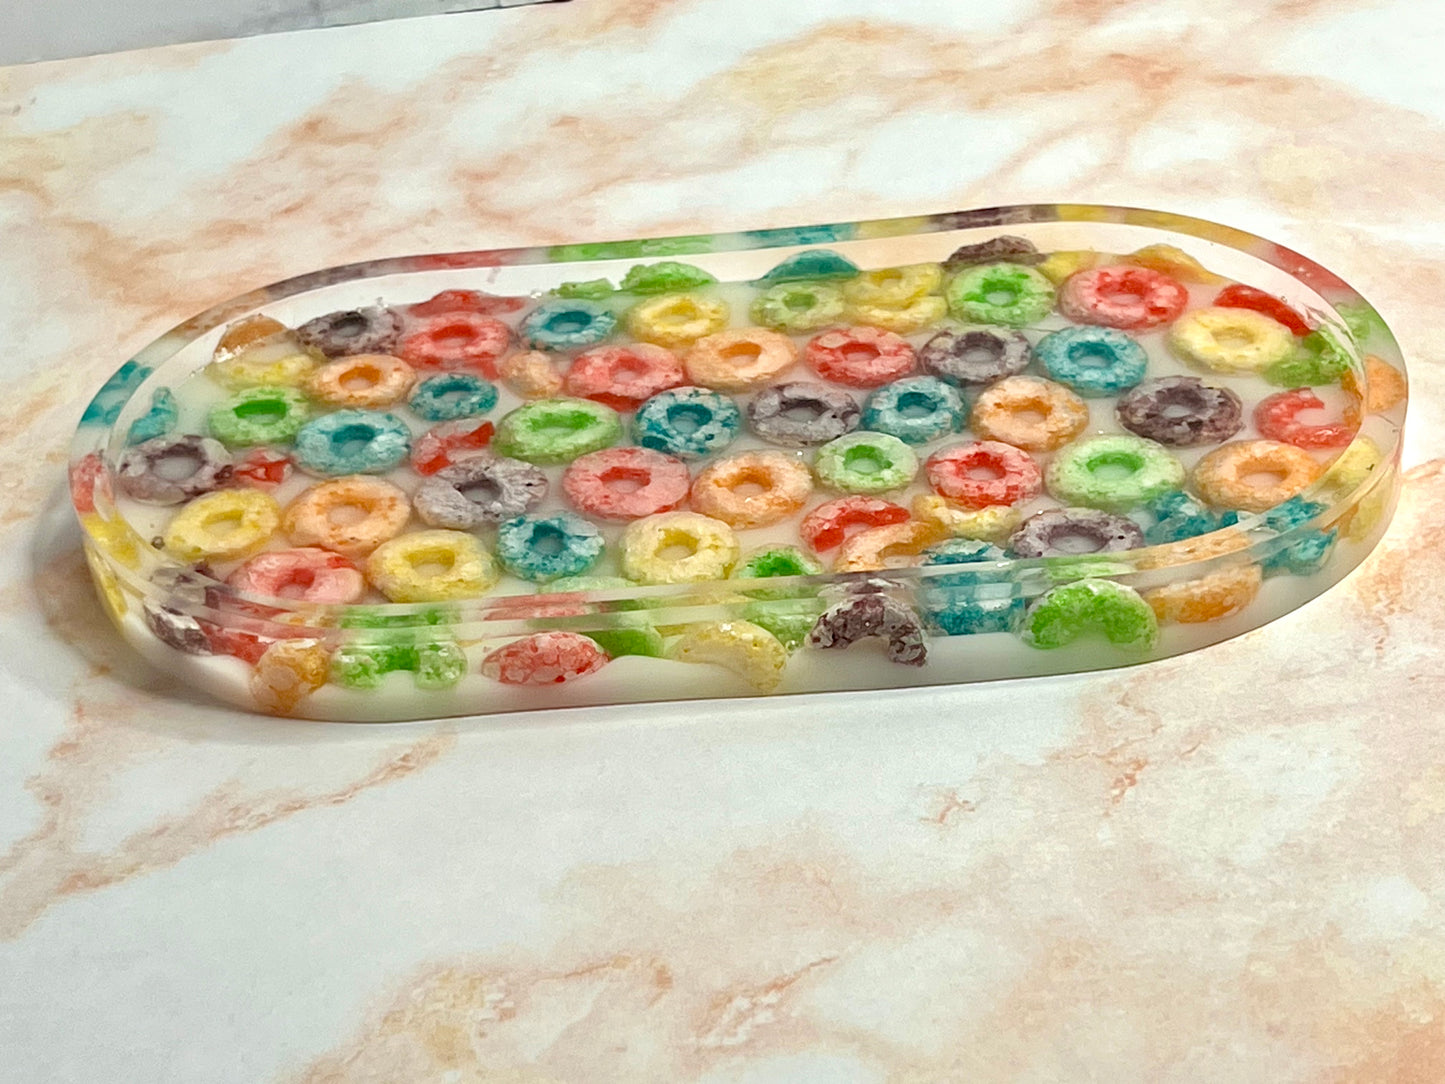 Cereal Trays